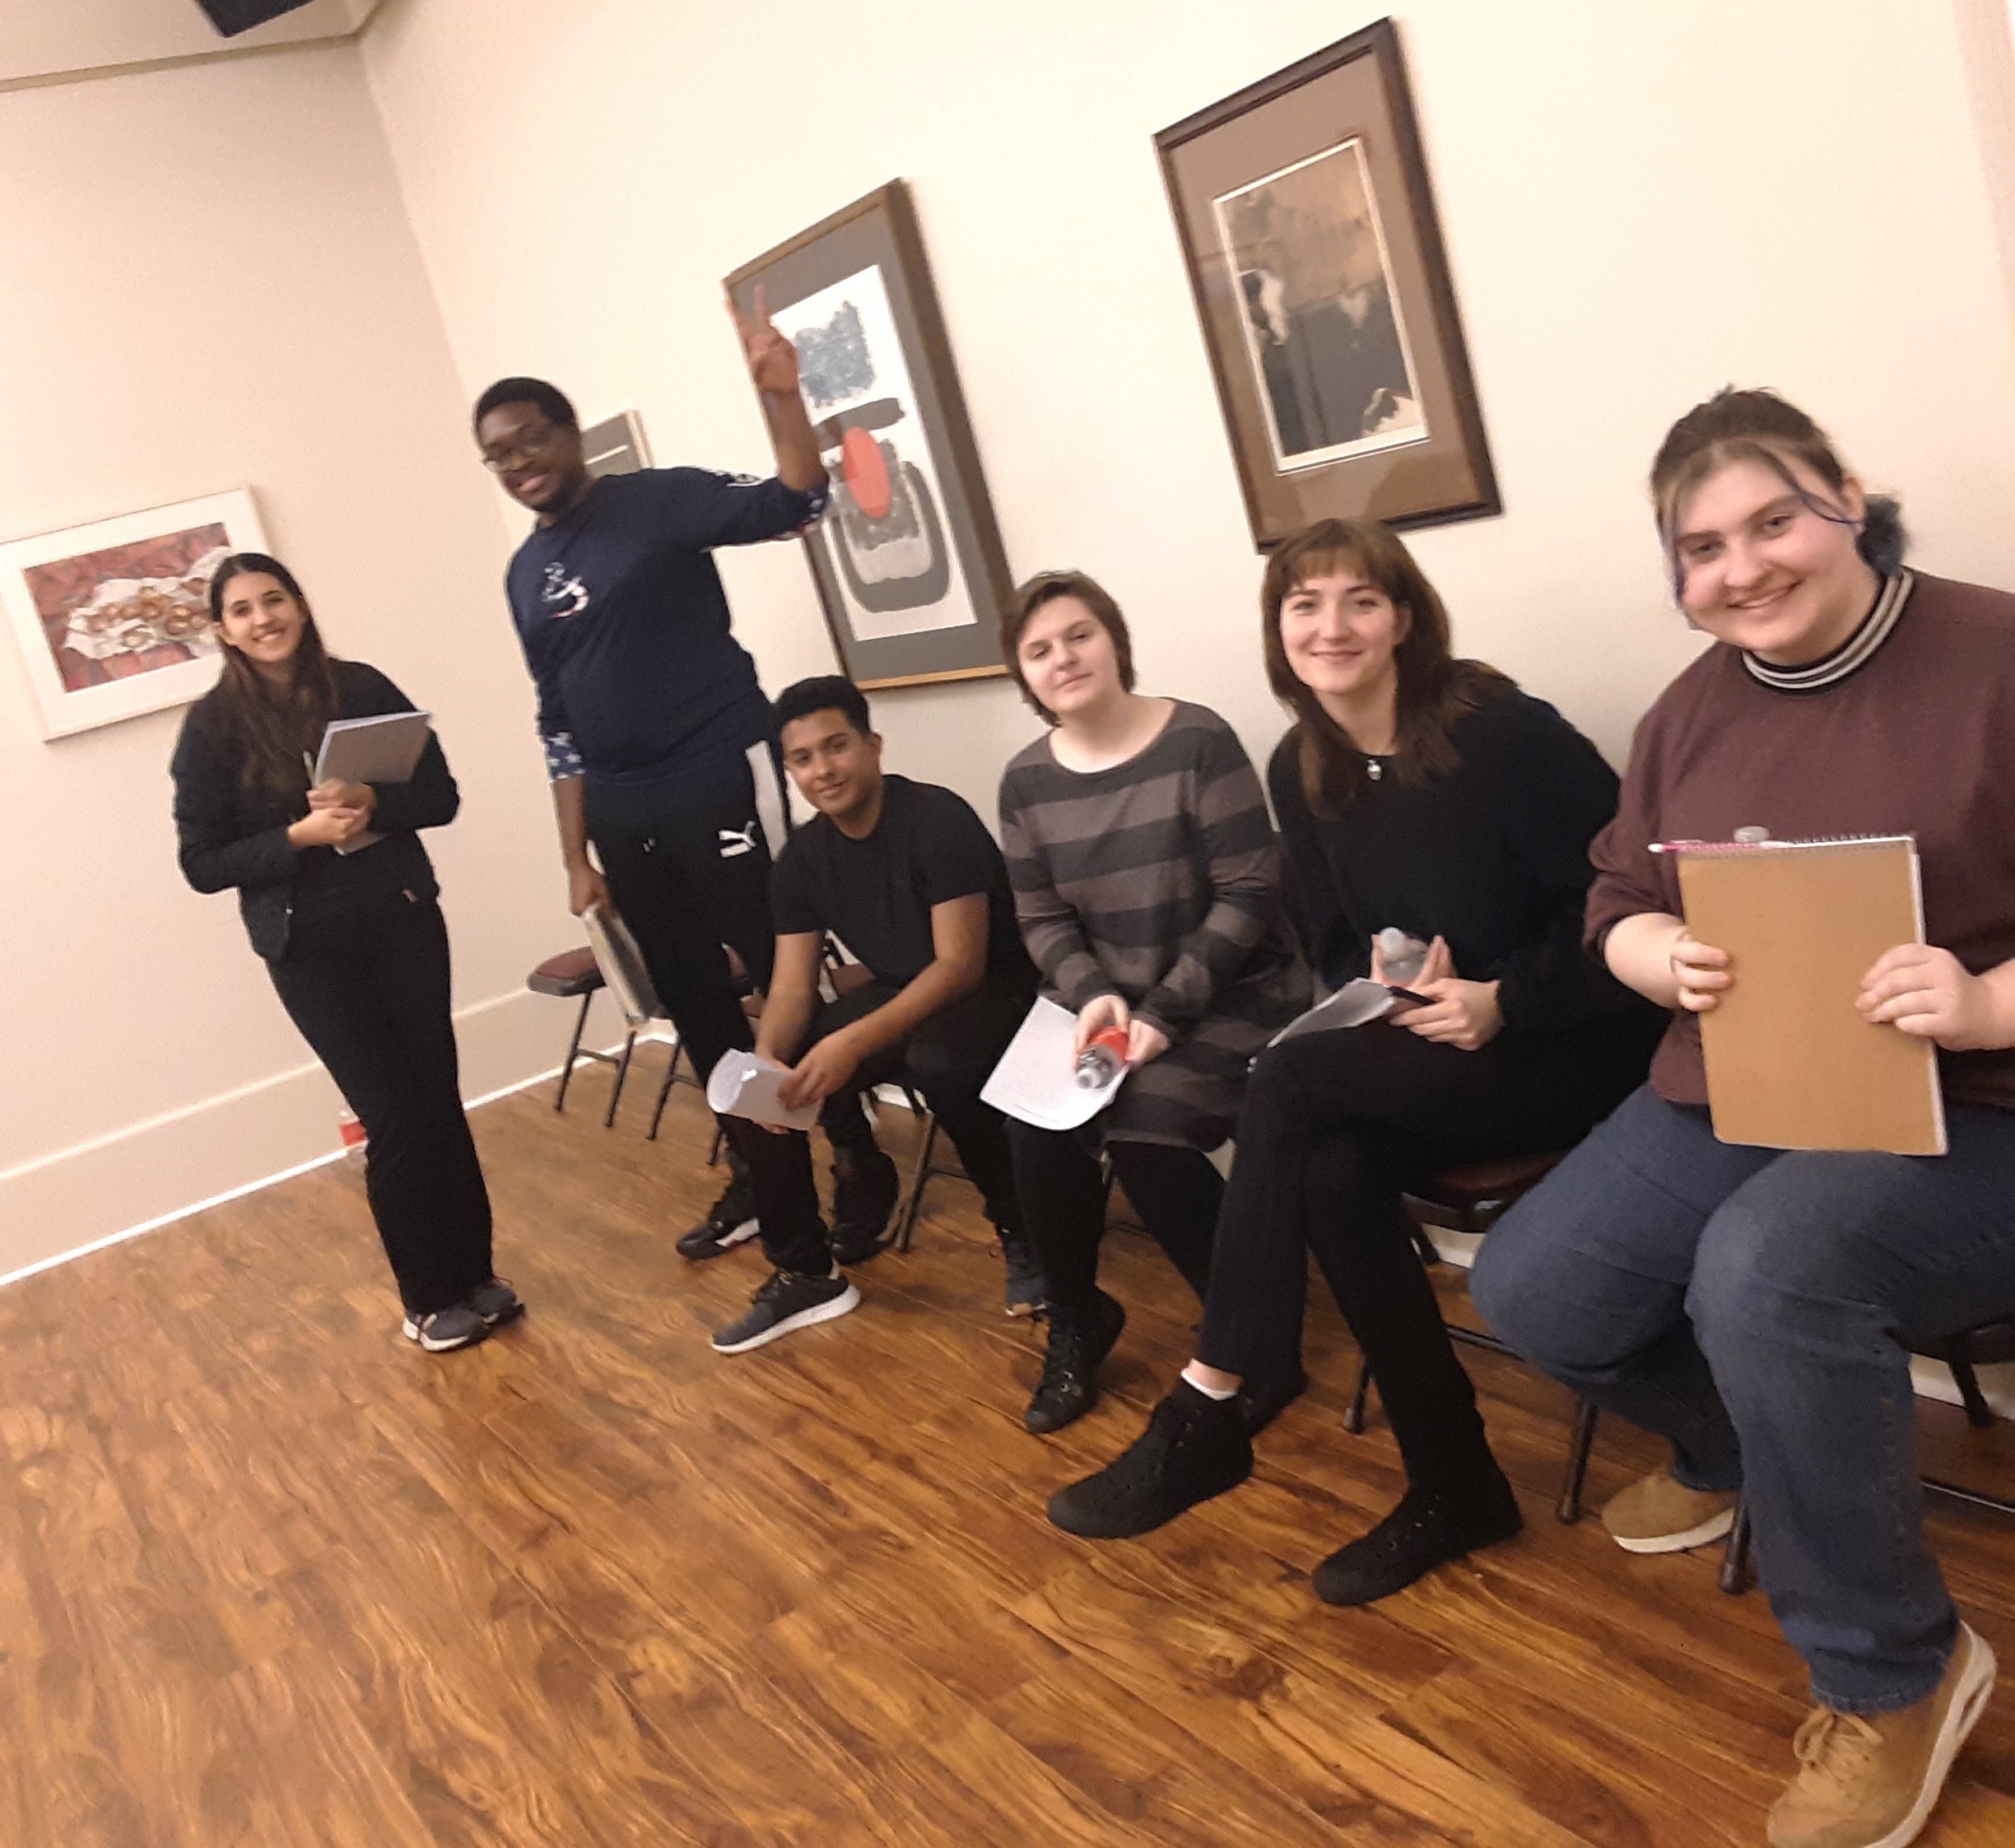 VPCC students (from left) Samantha Stegall, Travough Lane, David Salmeron, Amanda Moon, Hannah Southers, and Matilyn Burnette participated in an acting workshop with The American Theatre in Hampton.